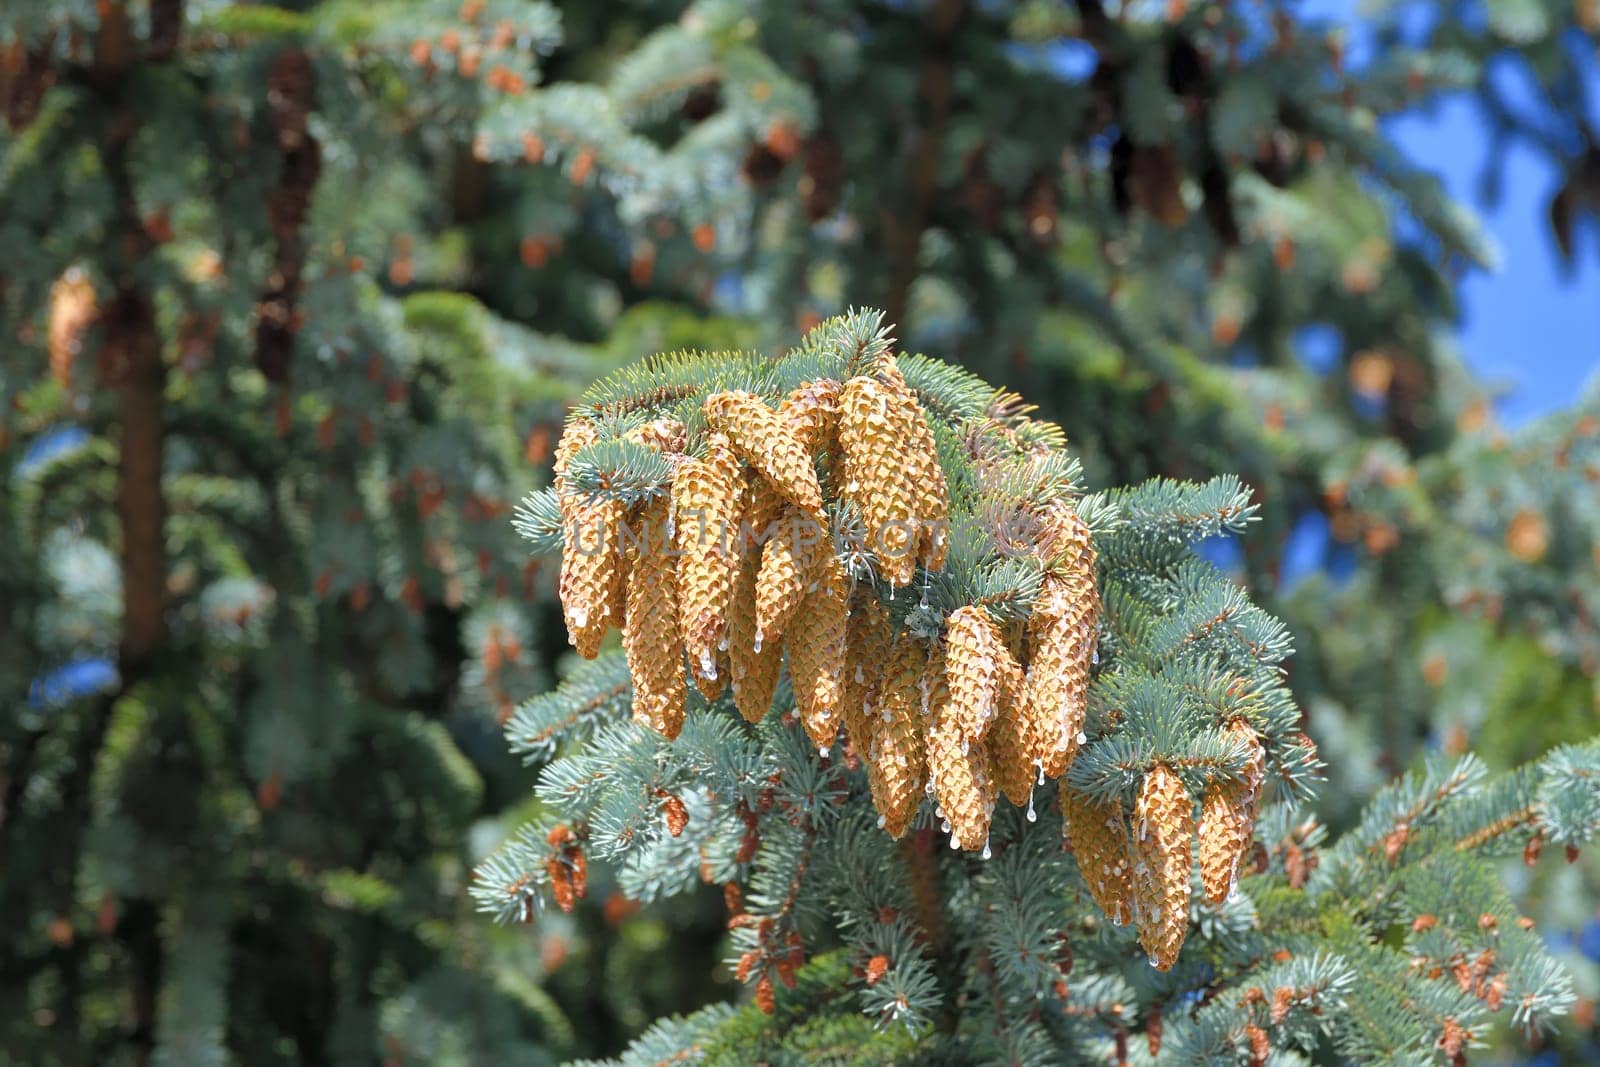 Blue spruce branch with large cones in large quantities by olgavolodina